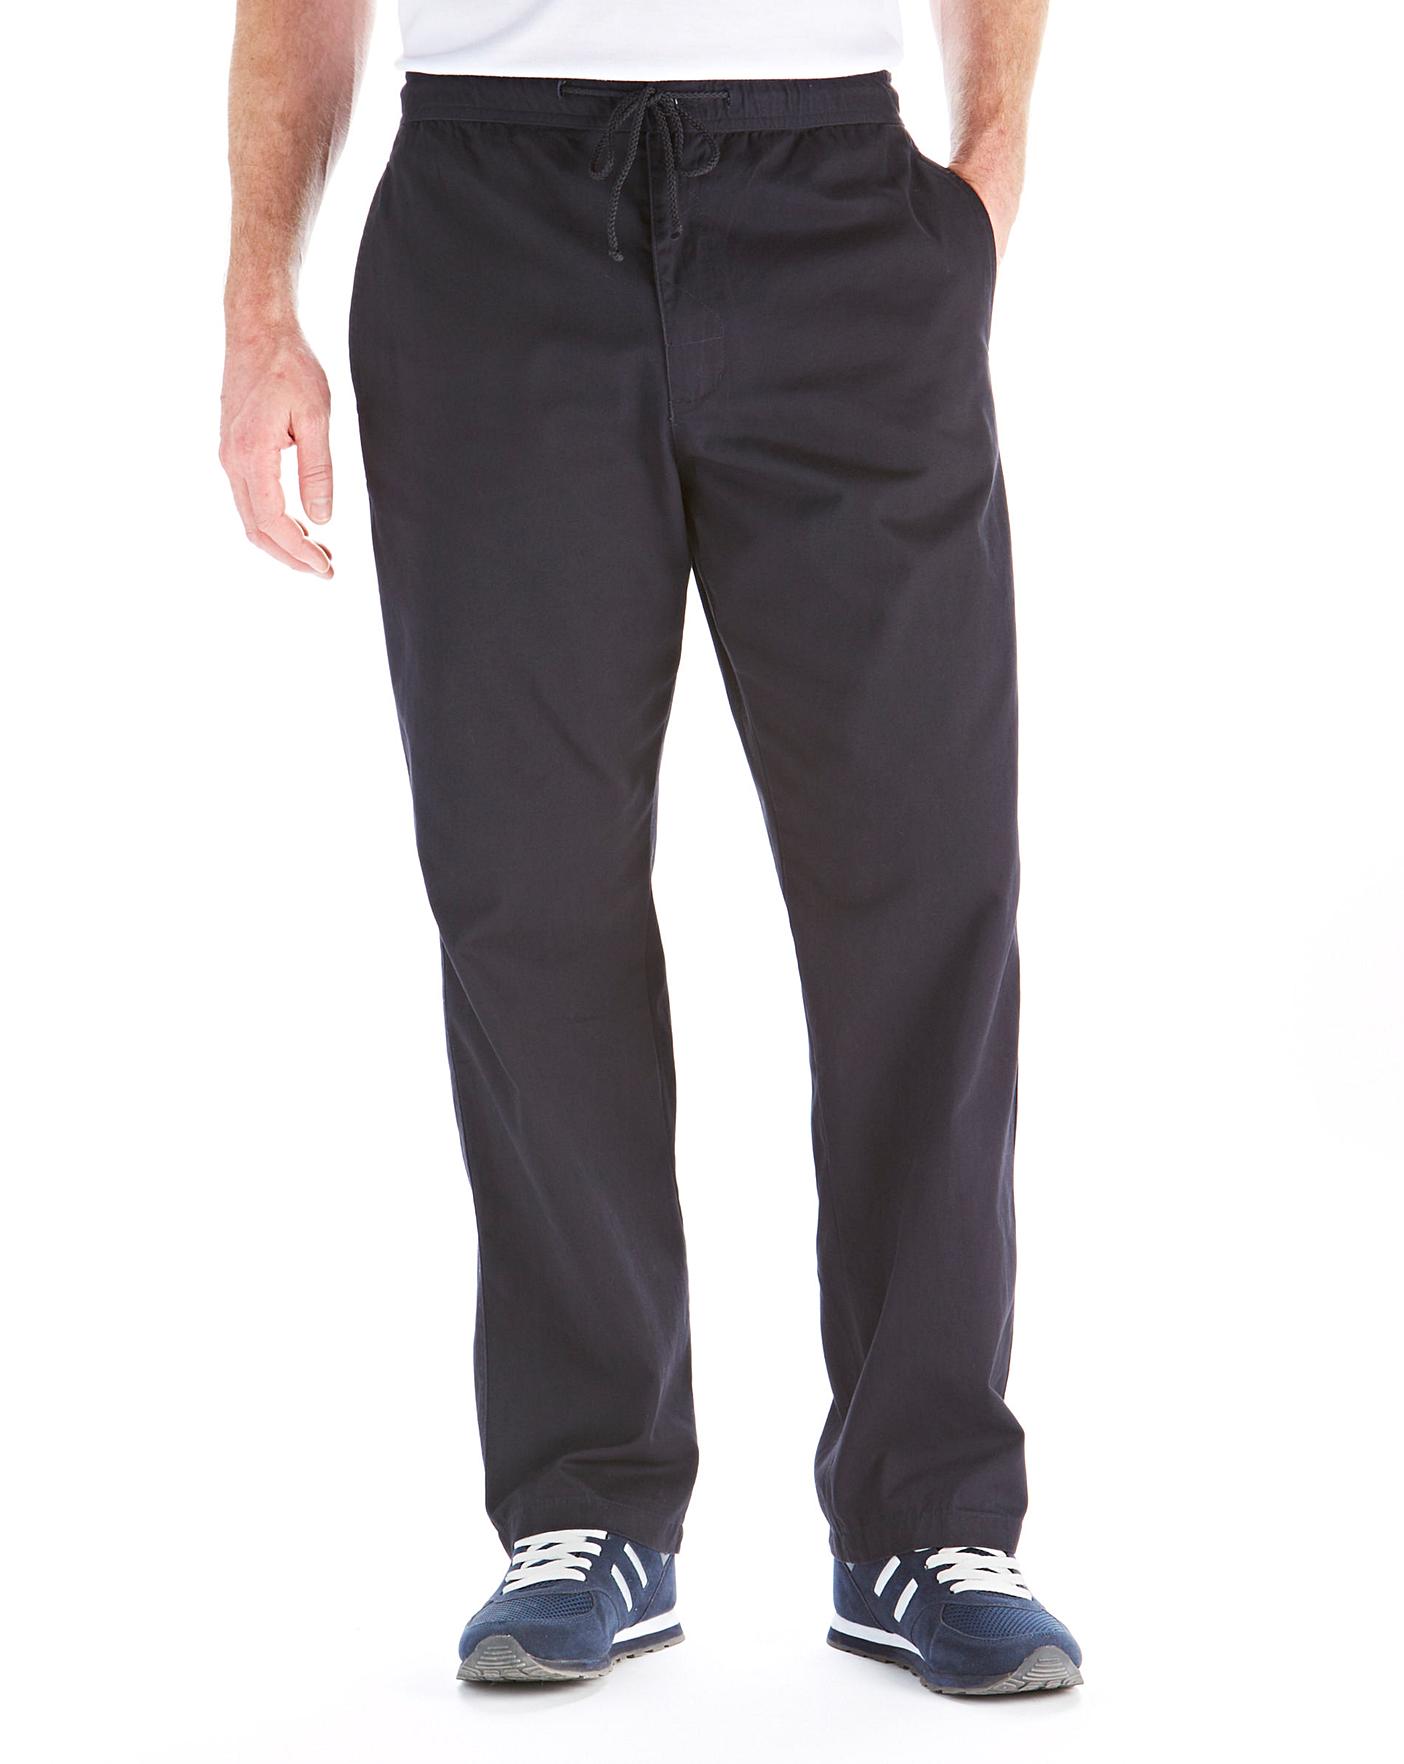 Premier Man Cotton Rugby Trousers 27in | J D Williams